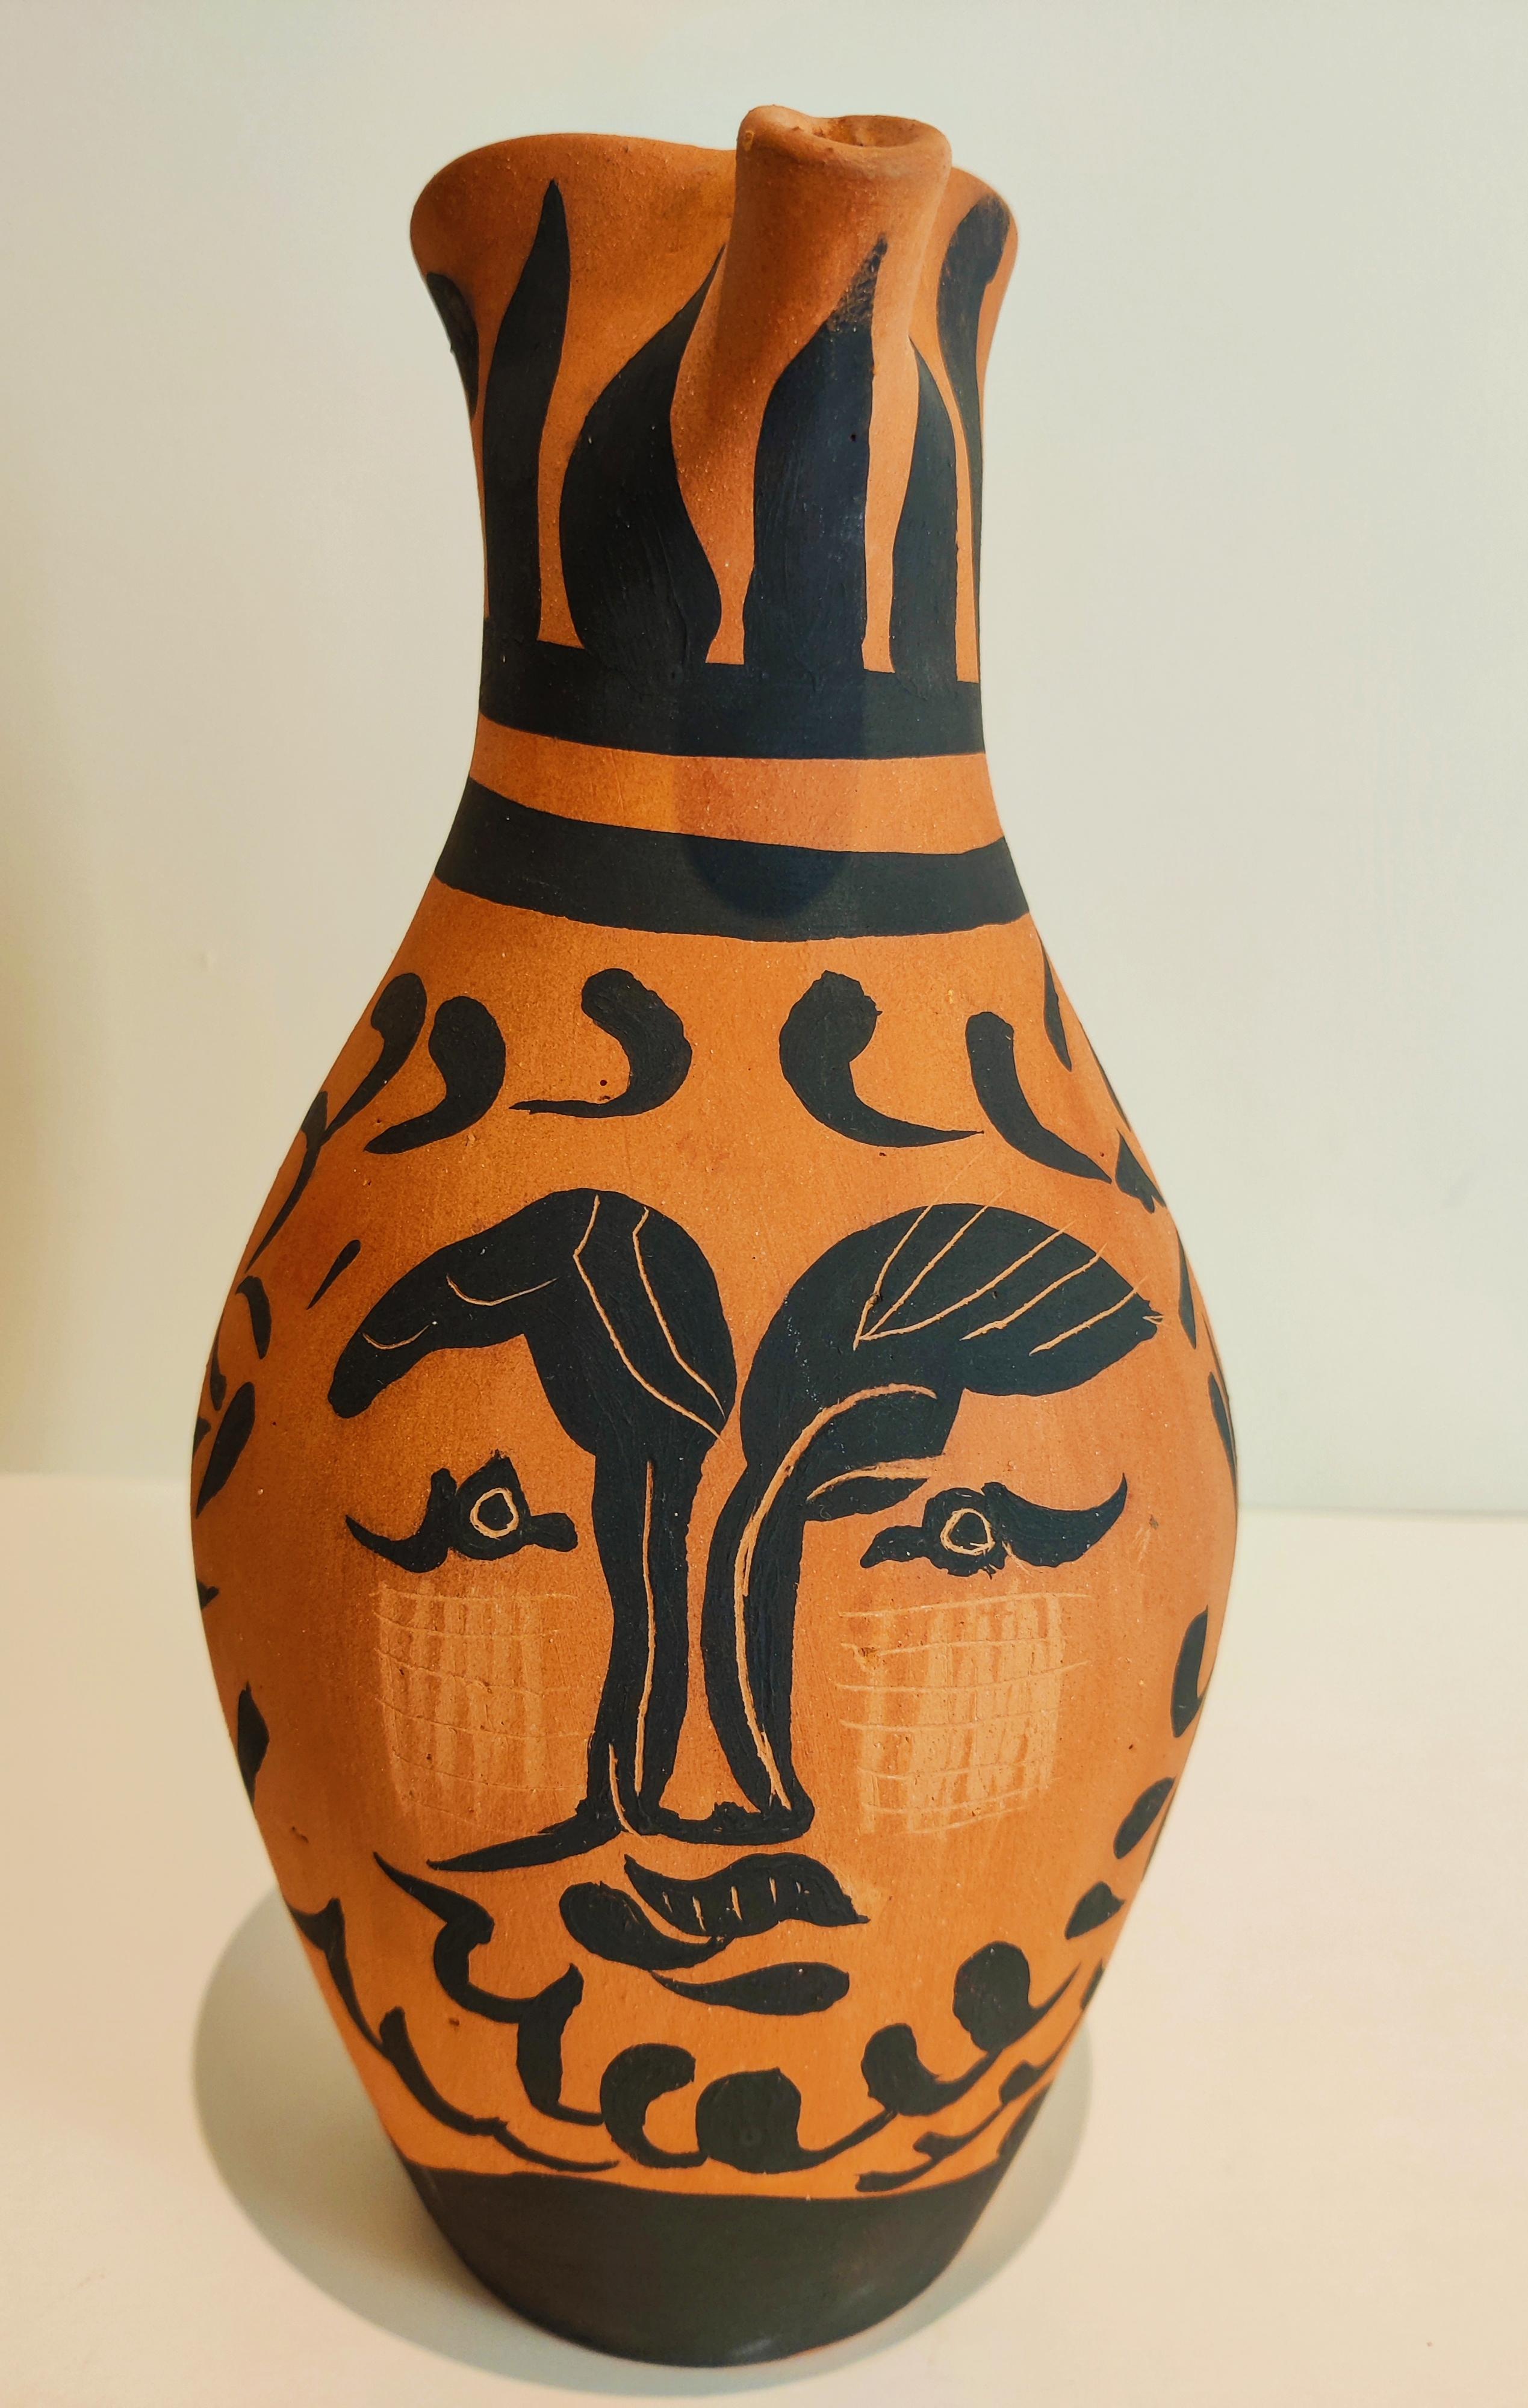 Pablo Picasso
Yan Brbu, 1964
Earthenware with engobe decoration
Size 26.5 x 13 cm
Edition: 294/300.
Inscribed 'Edition Picasso 294/300' and with the 'Edition Picasso' and 'Madoura Plein Feu' pottery stamps on the underside.
A.R. 513